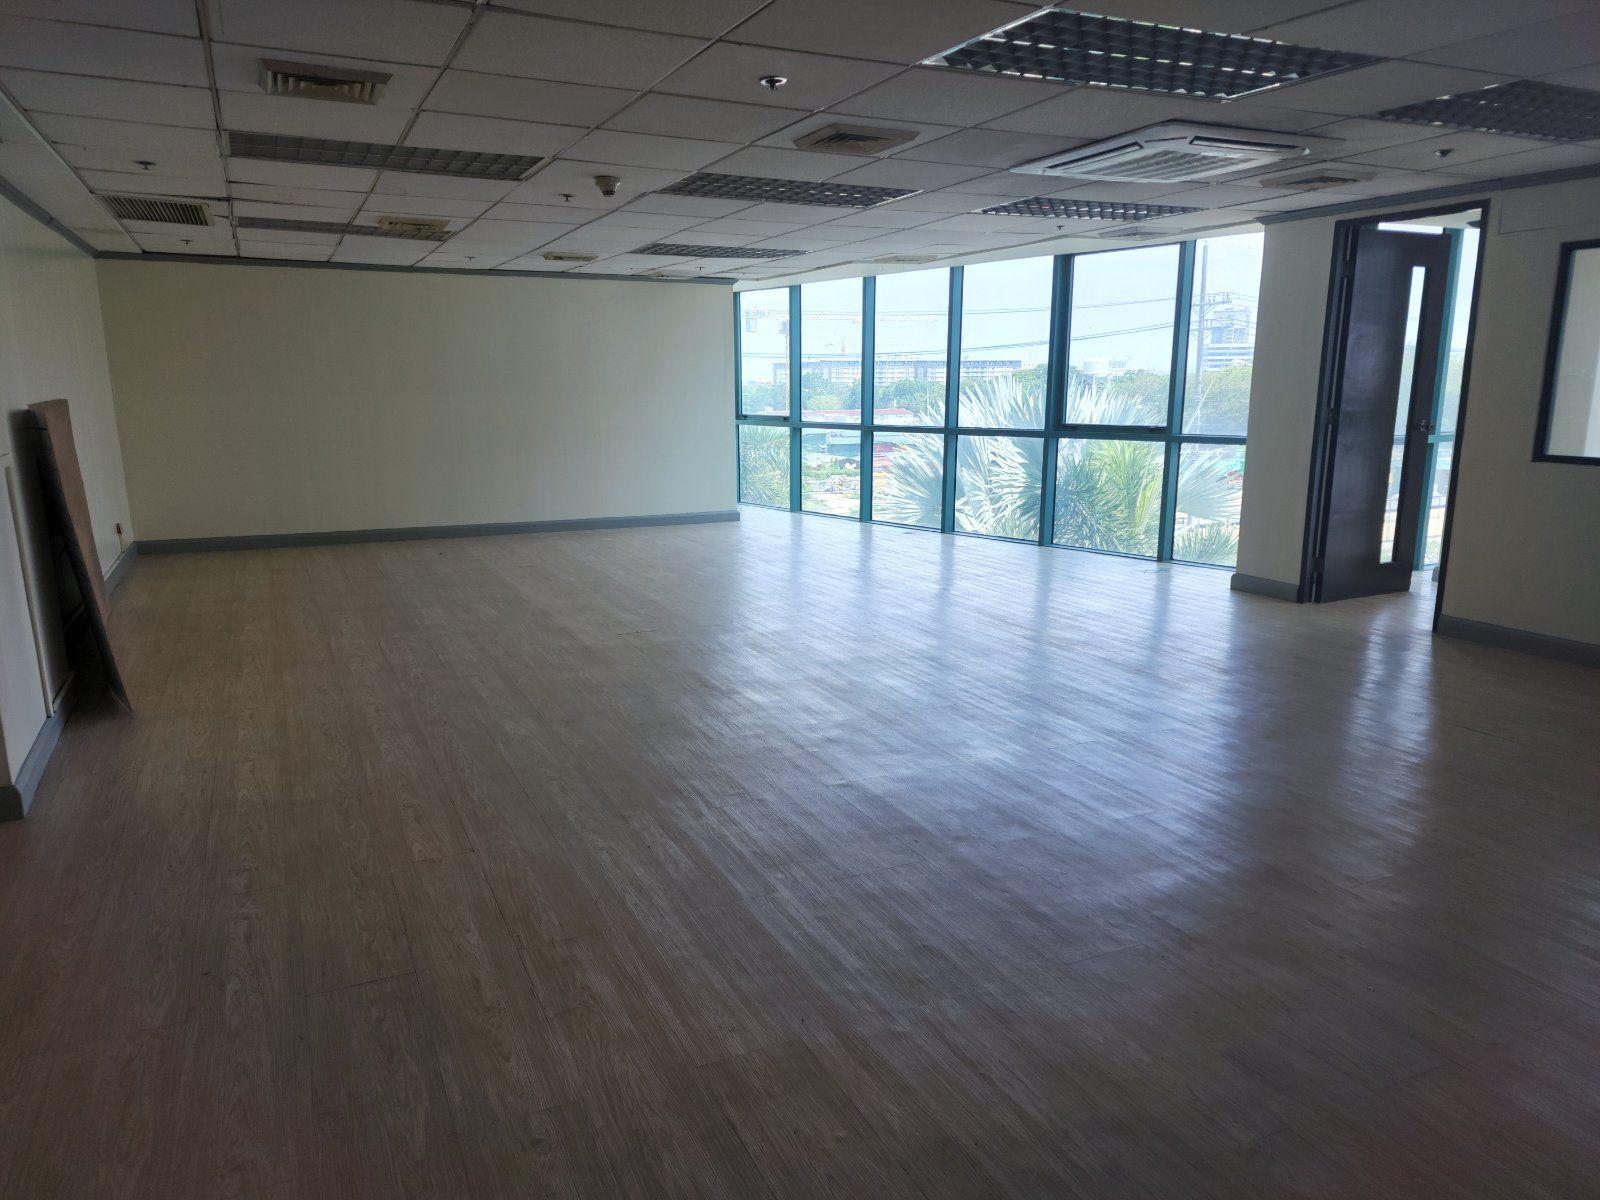 117 sqm Fitted Office Space Lease Rent Alabang Muntinlupa